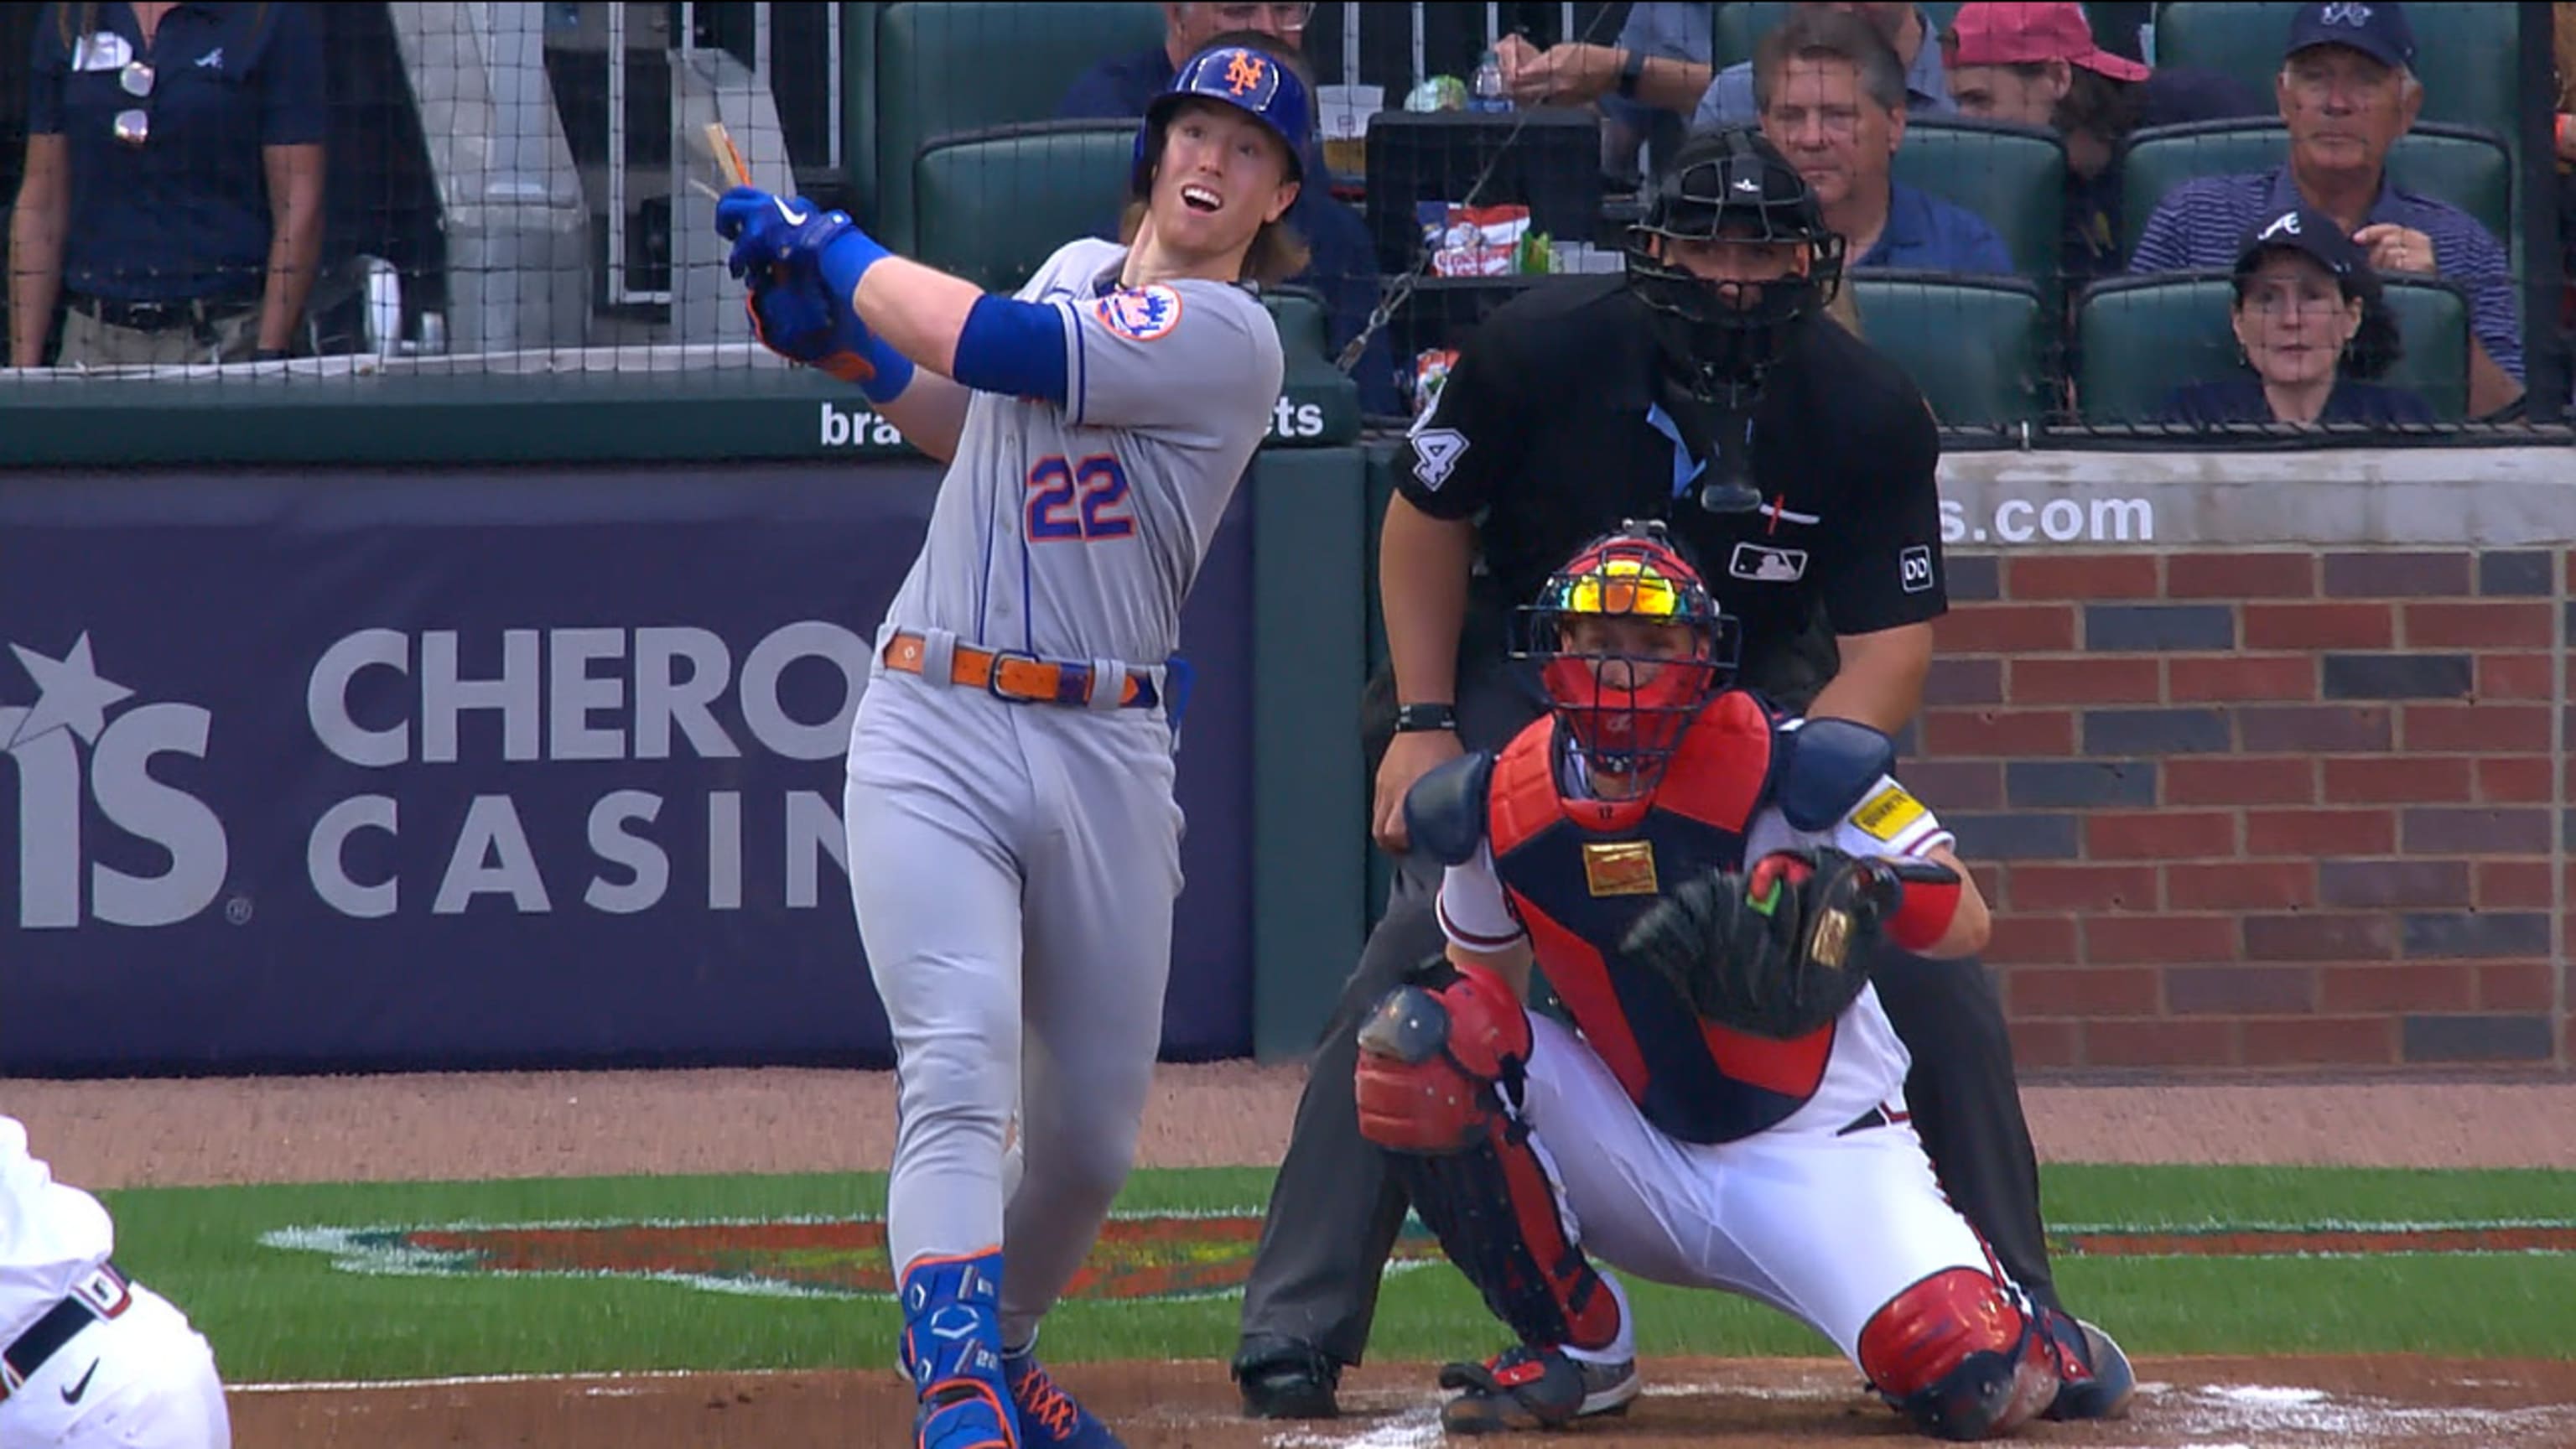 Pete Alonso, the NL home run leader, makes speedy return to Mets after  wrist injury – KGET 17